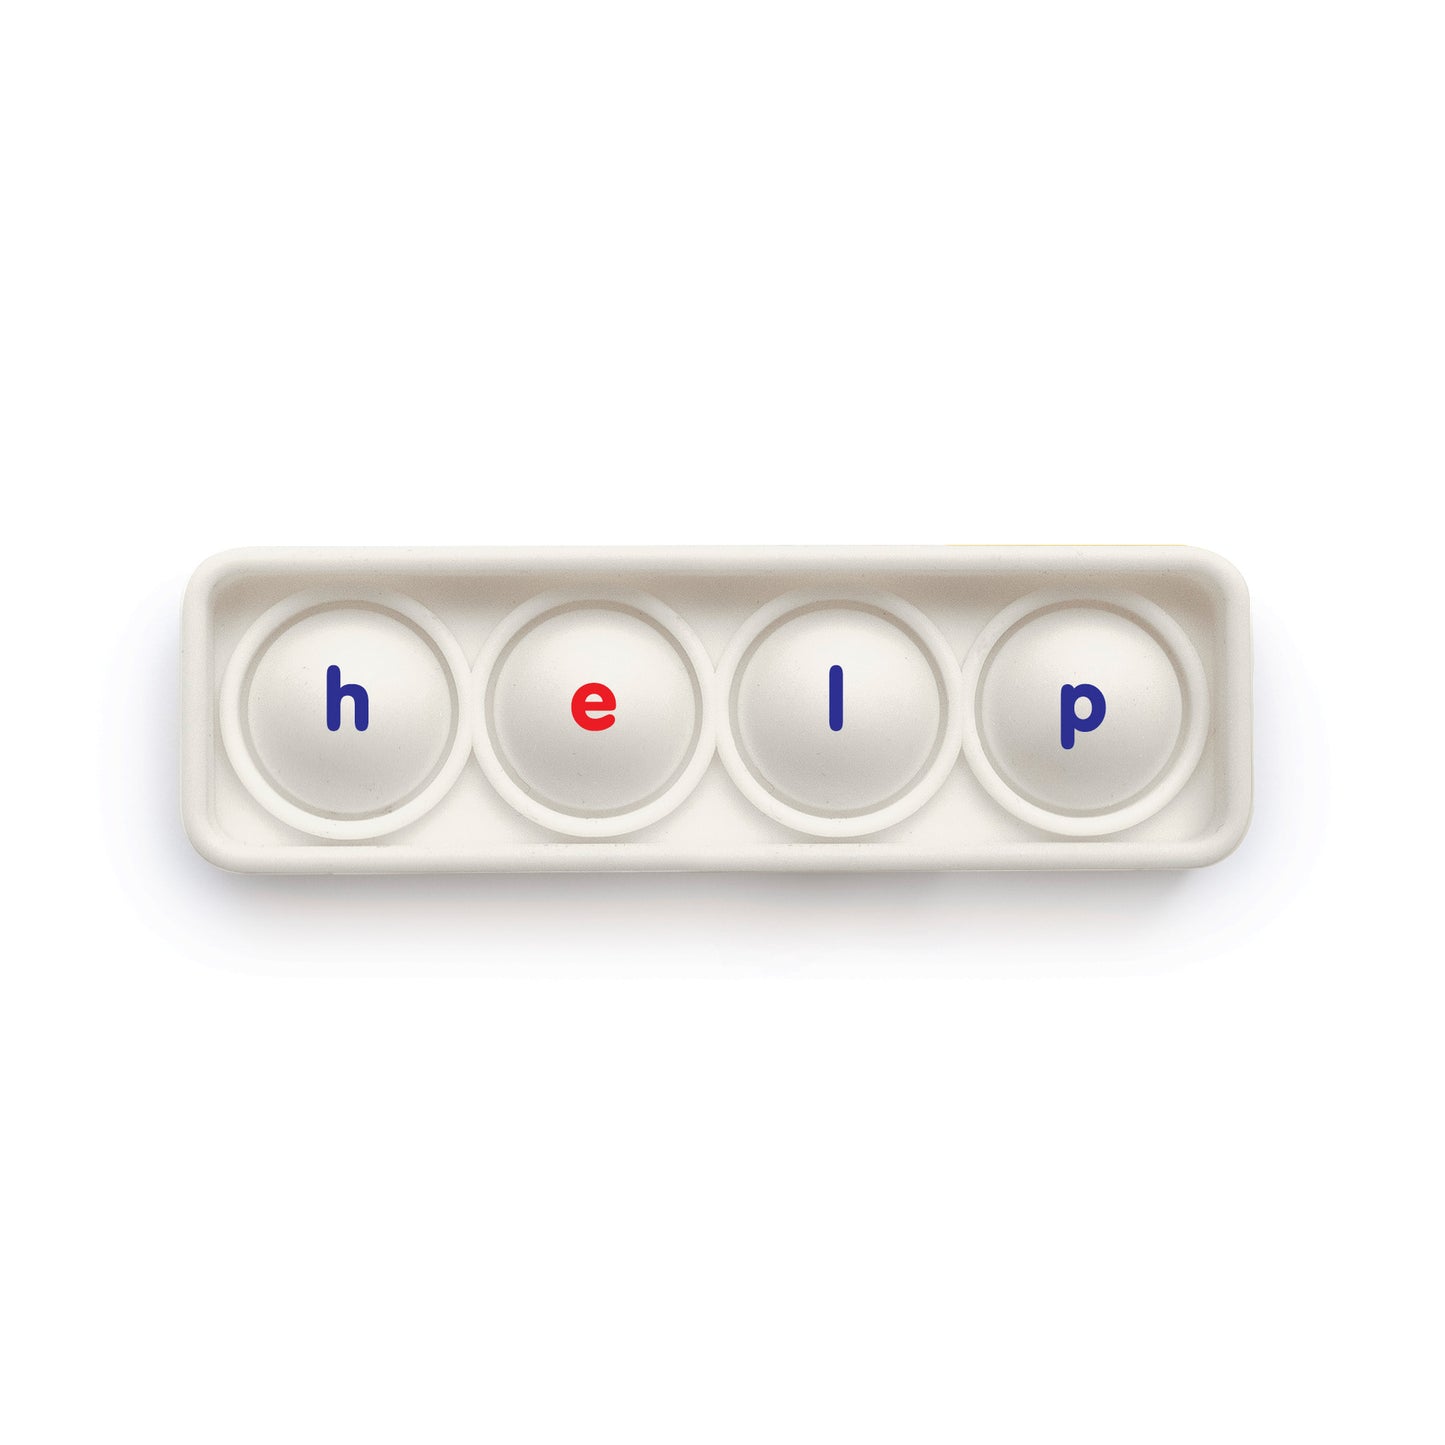 Sight Word Bubble Boards, Set of 12